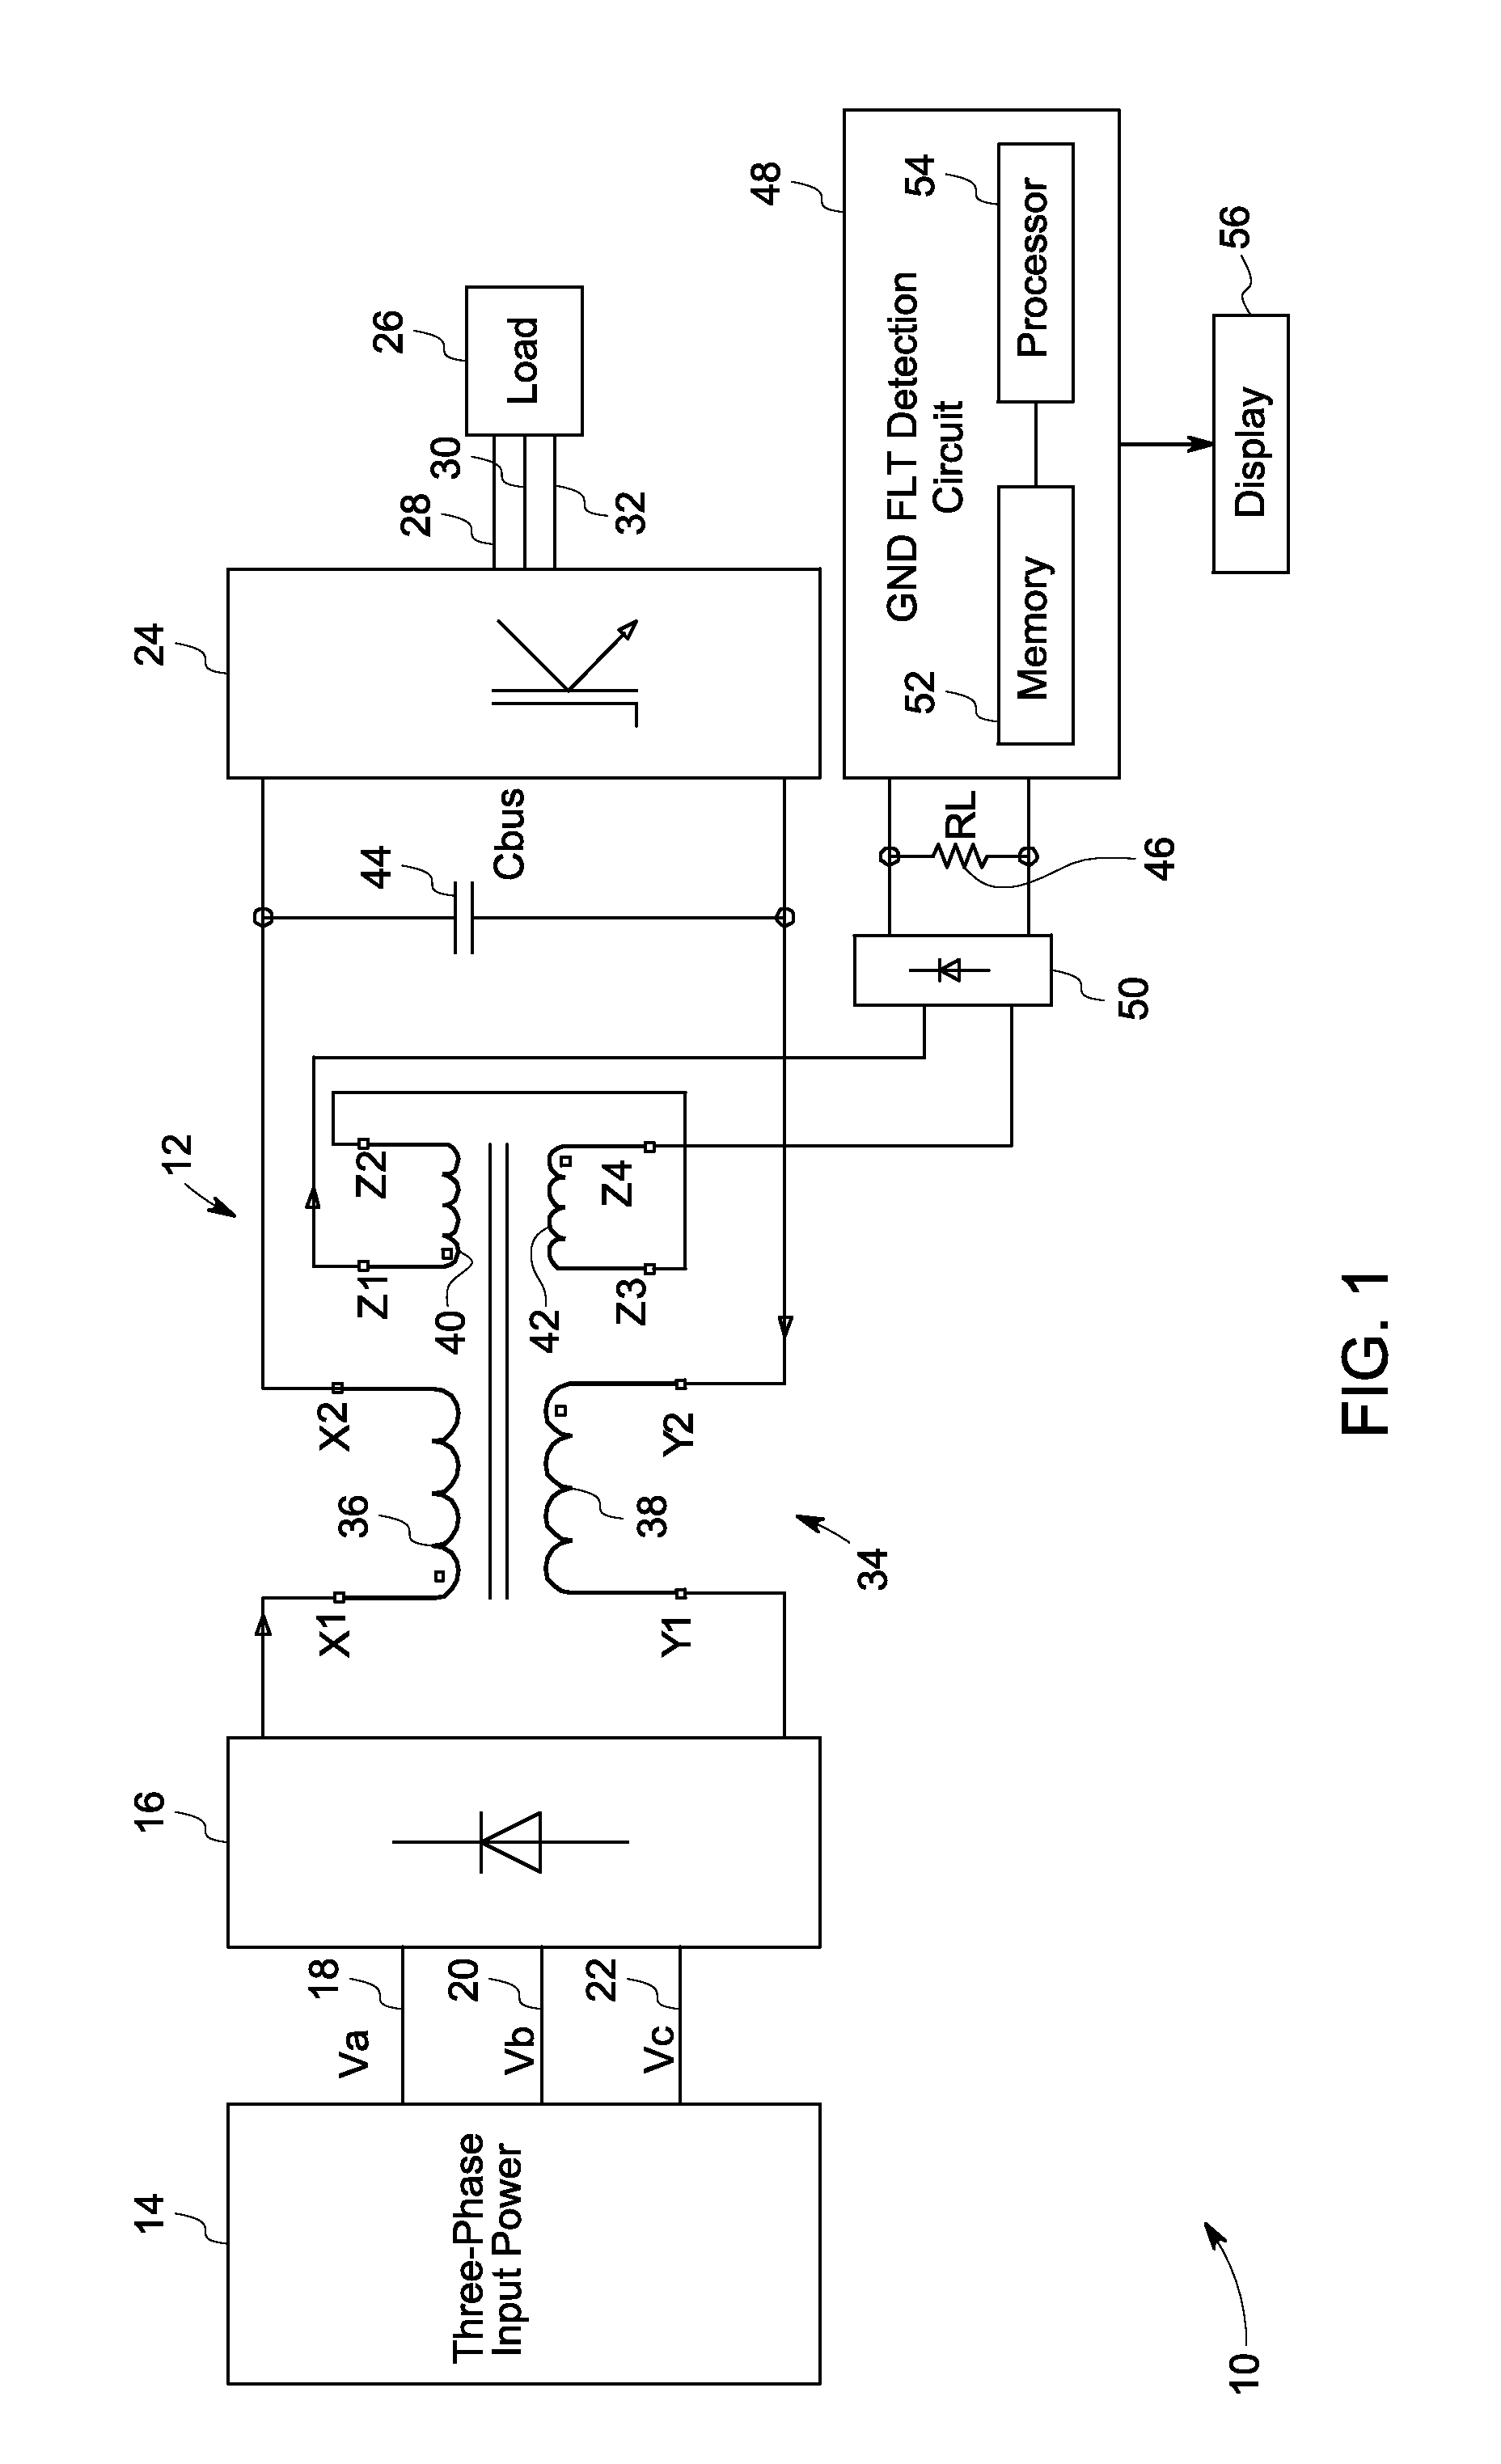 Ground fault detection system and method